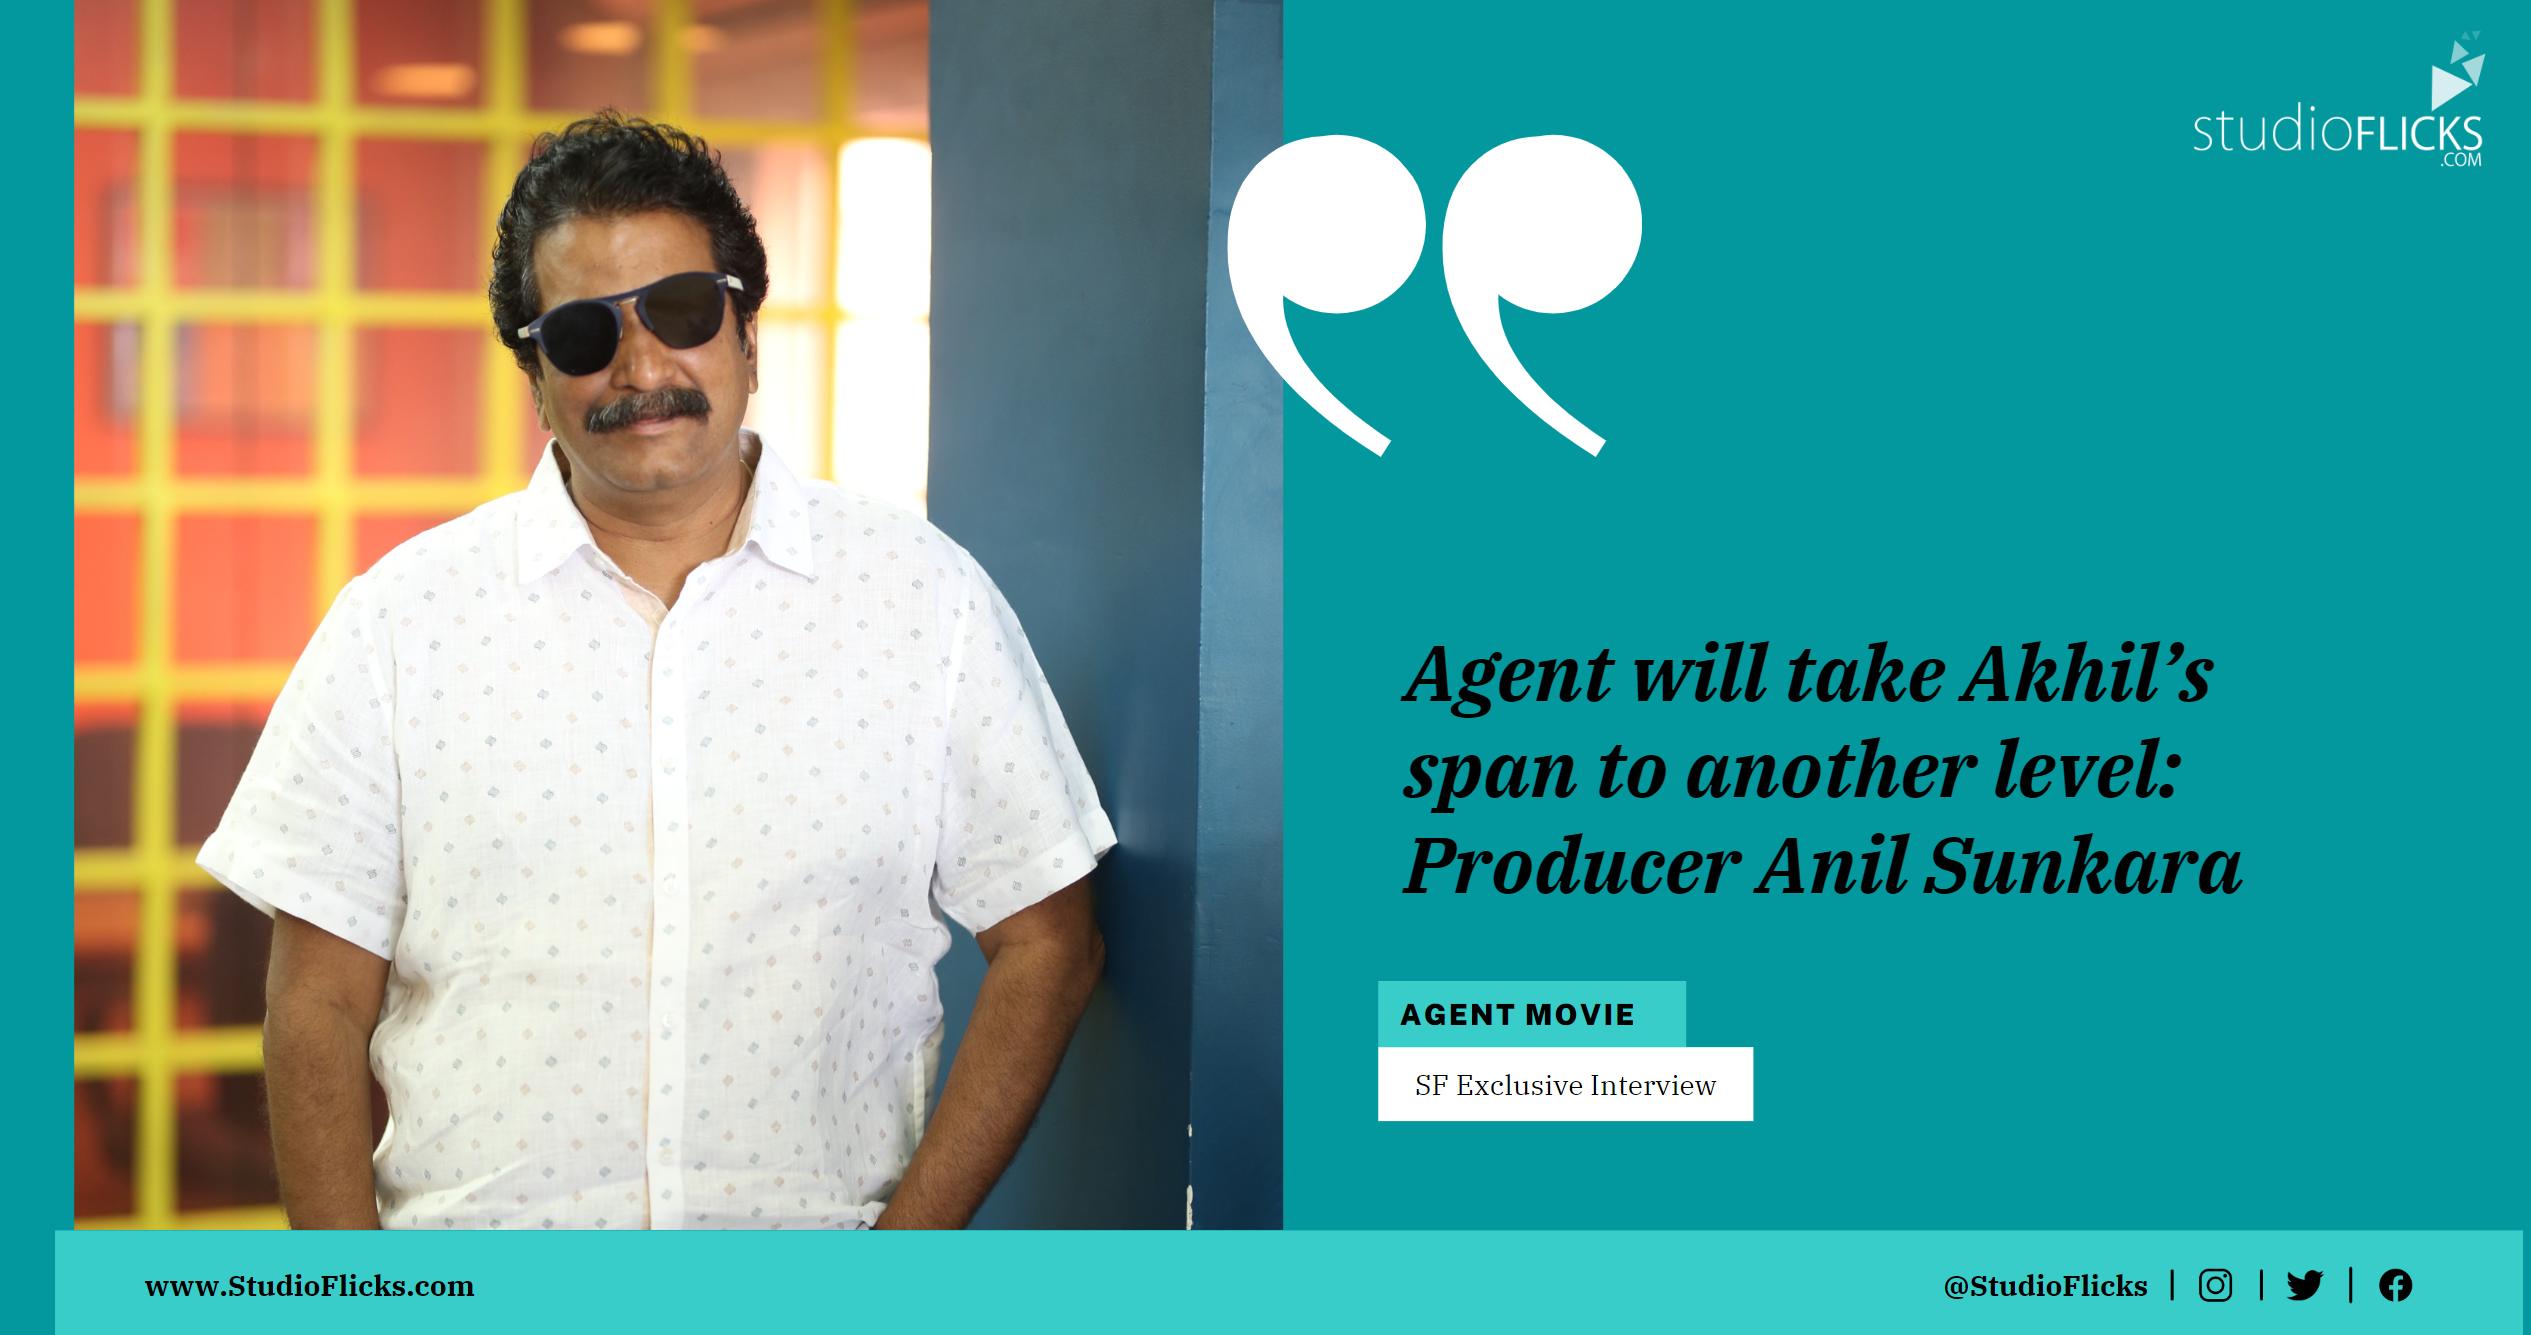 Agent will take Akhil’s span to another level Producer Anil Sunkara